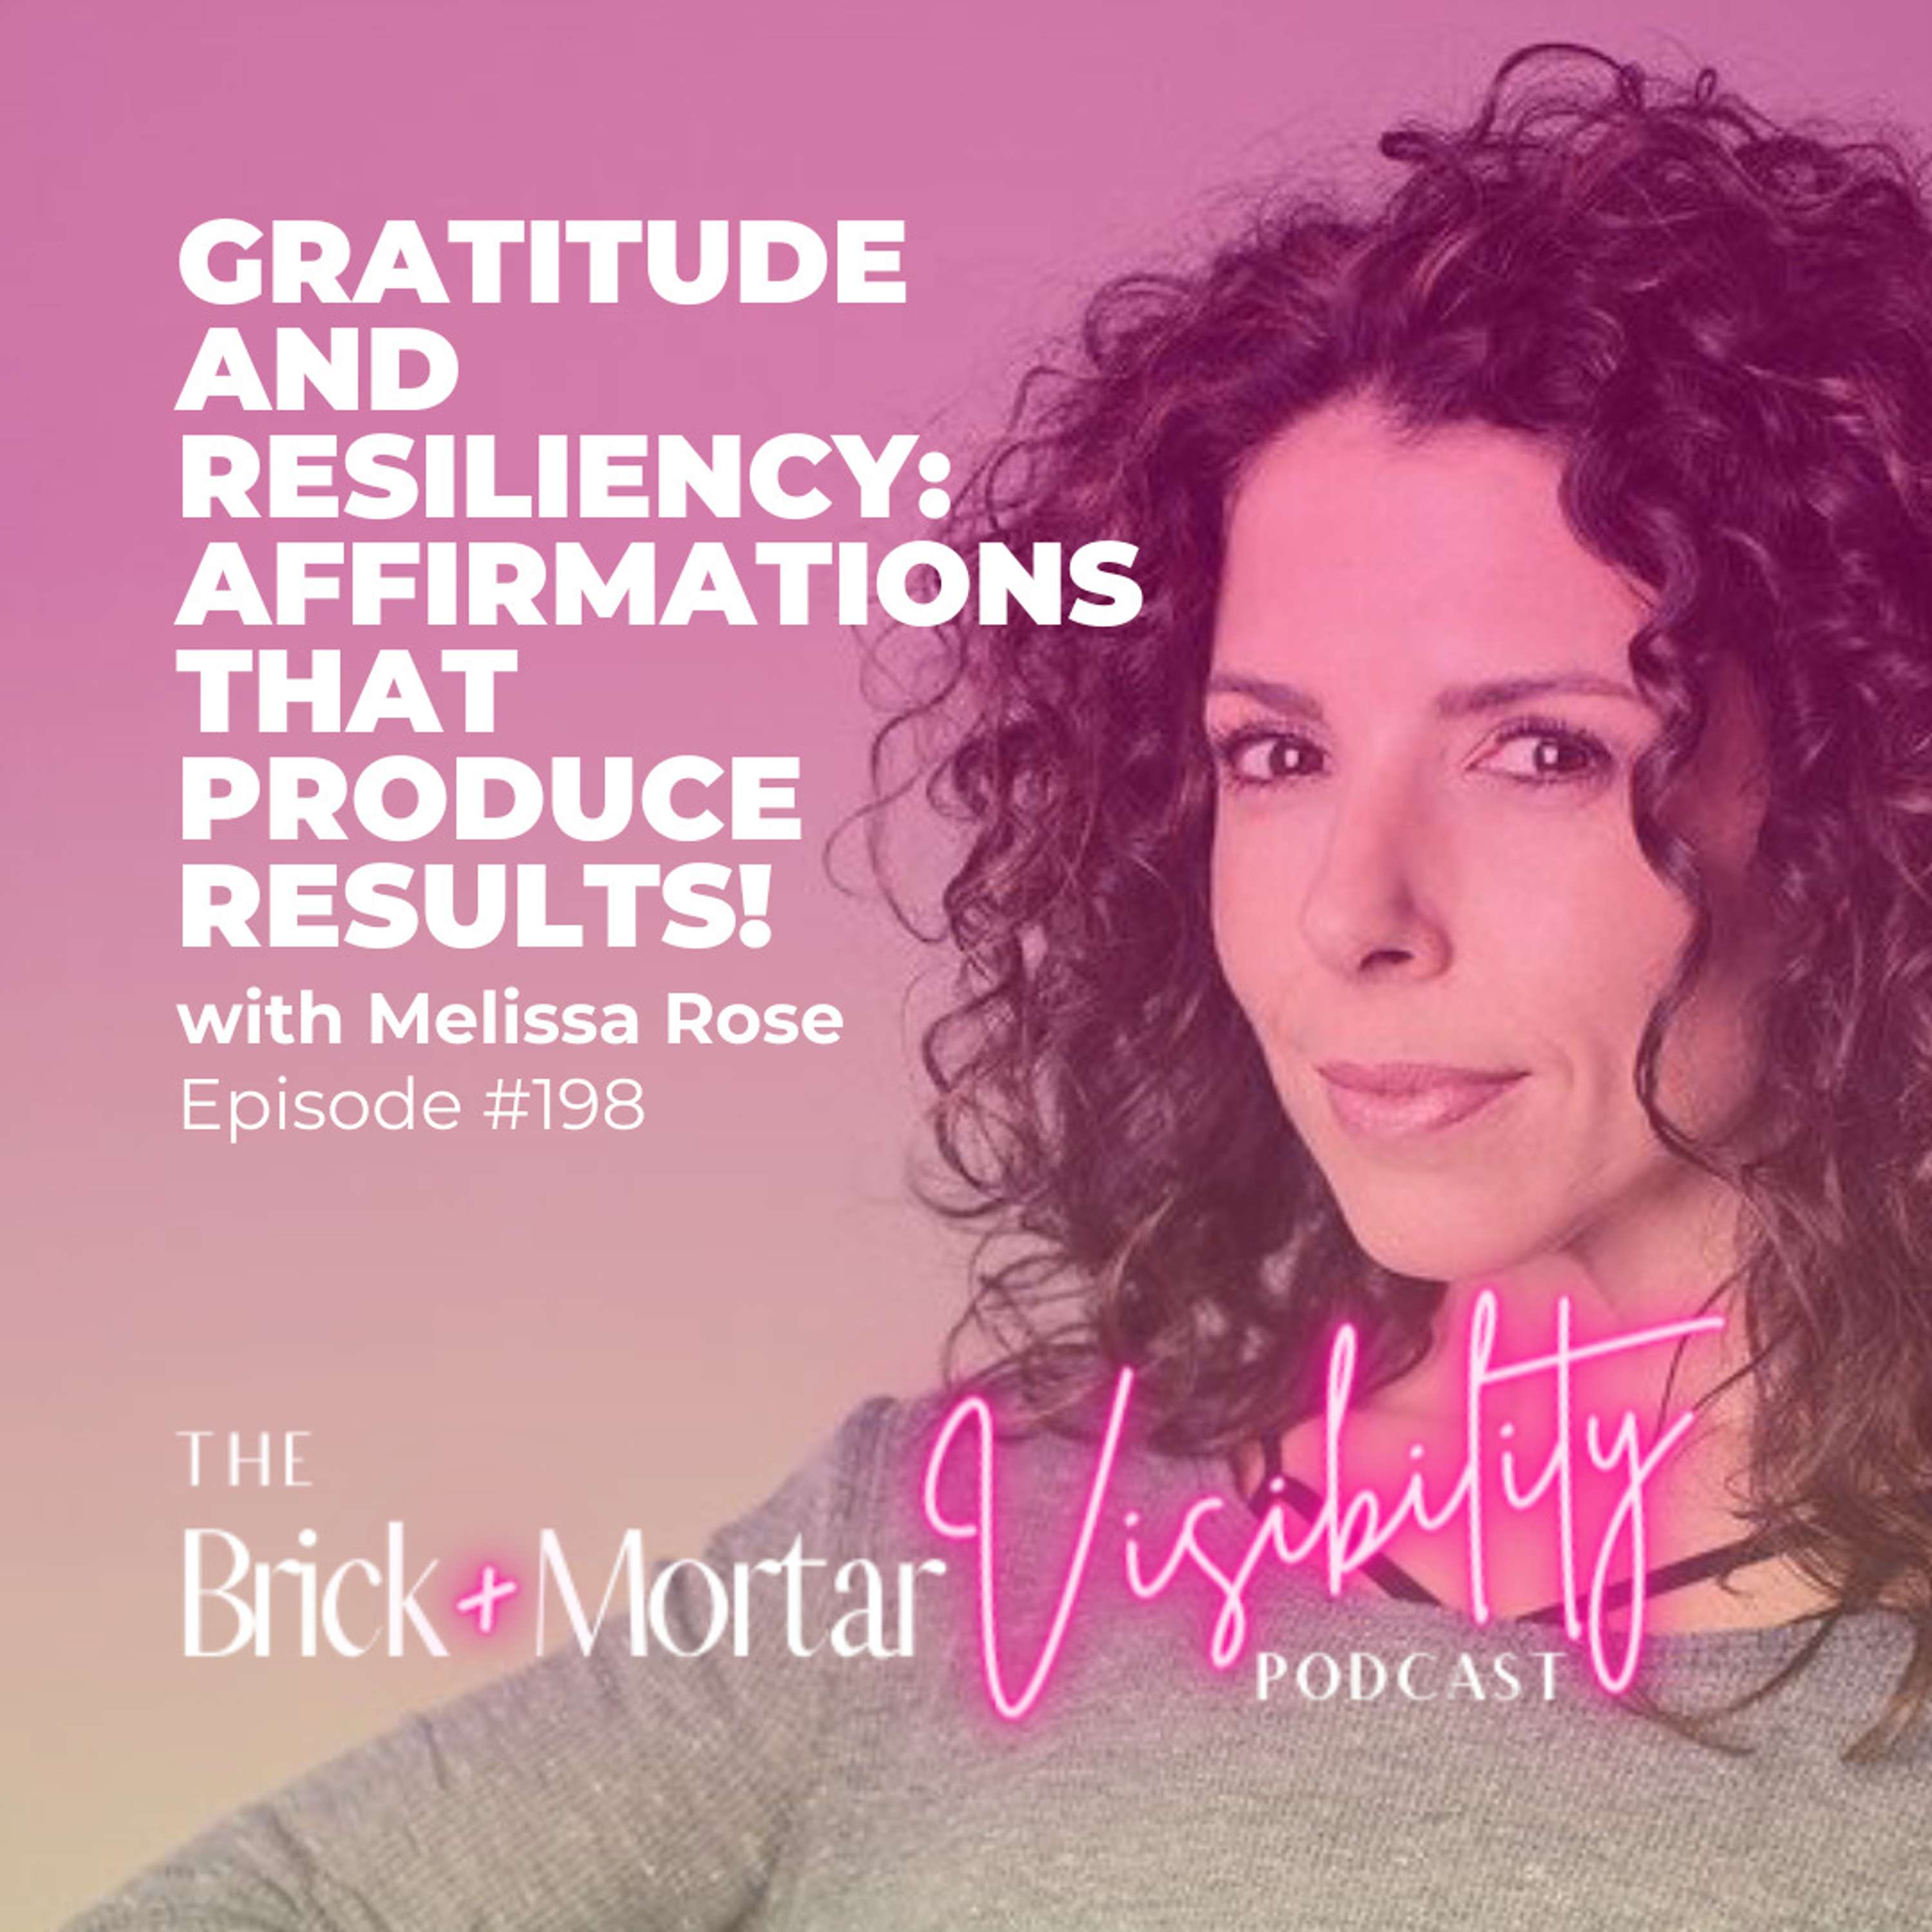 Gratitude and Resiliency: Affirmations that Produce Results!